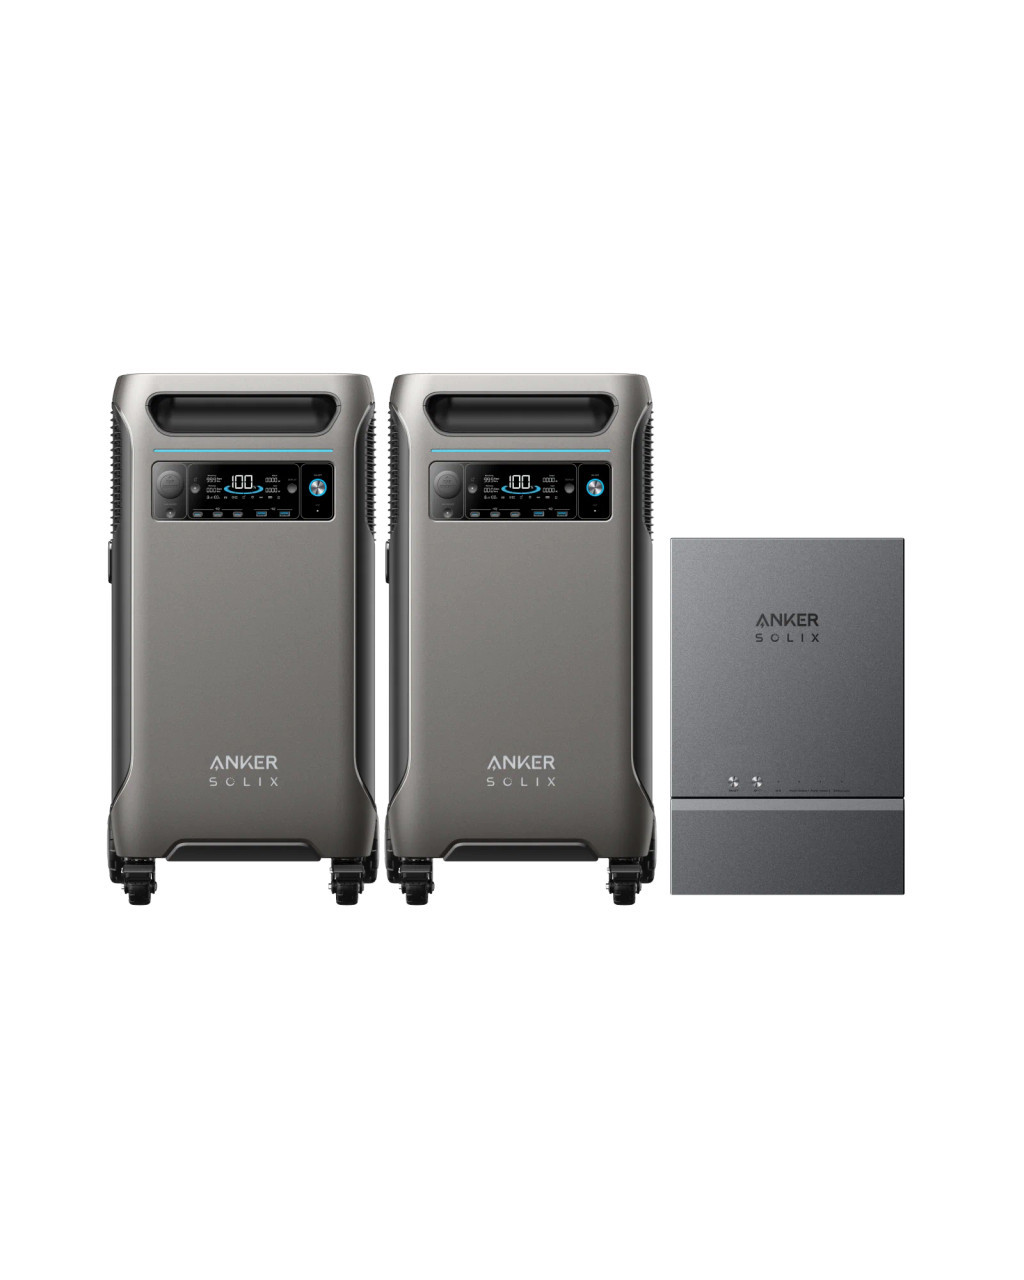 2× Anker SOLIX F3800 | 12000W, 7.68kWh + Smart Home Power Kit